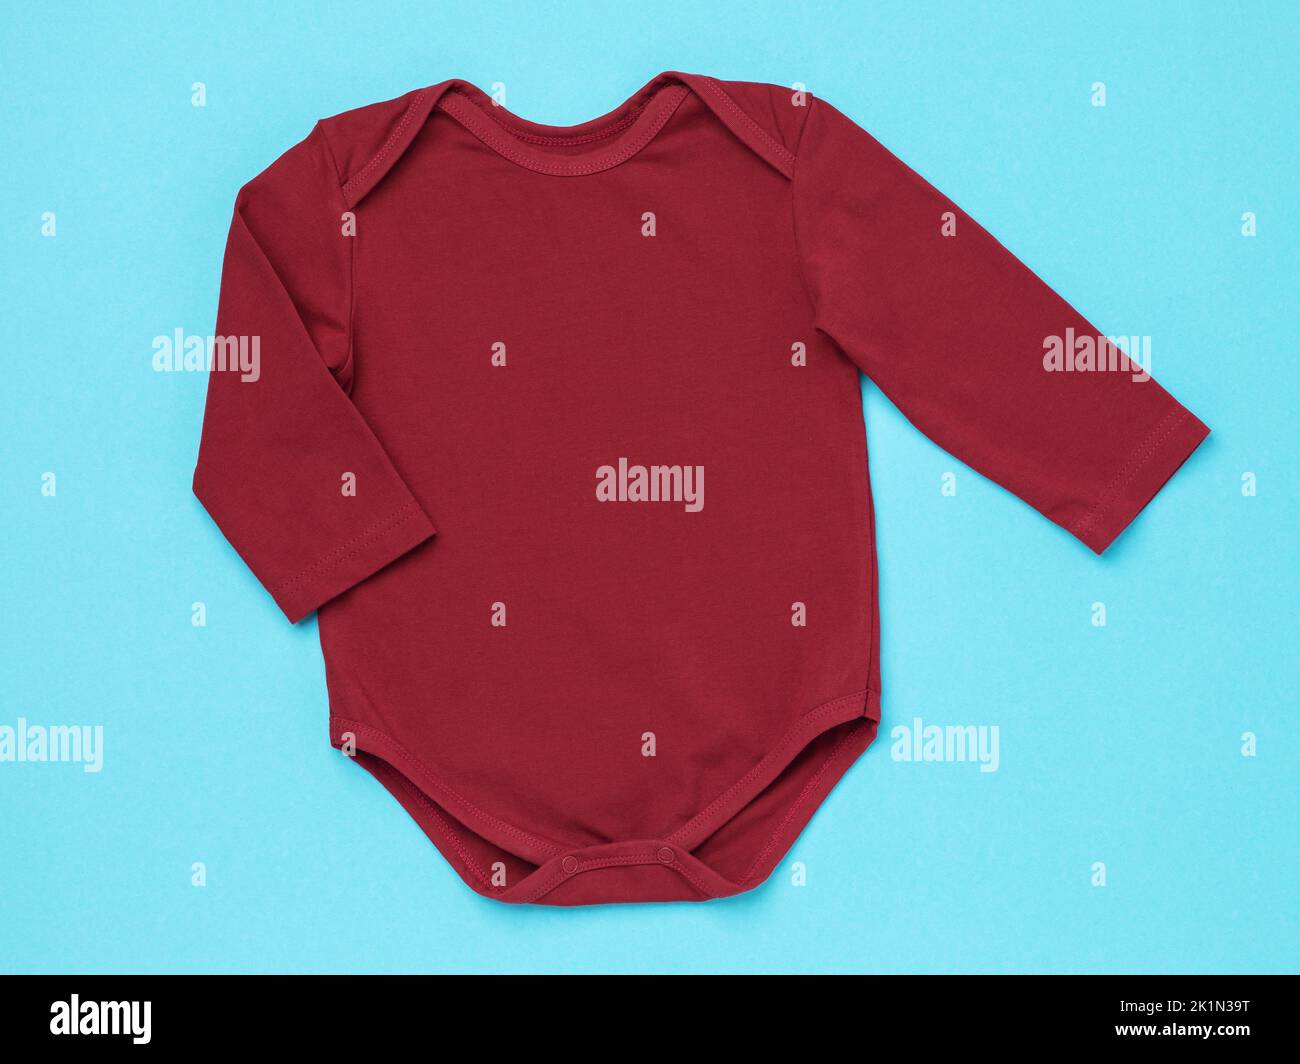 Children's bodysuit with long sleeves of burgundy color on a blue background, top view Stock Photo